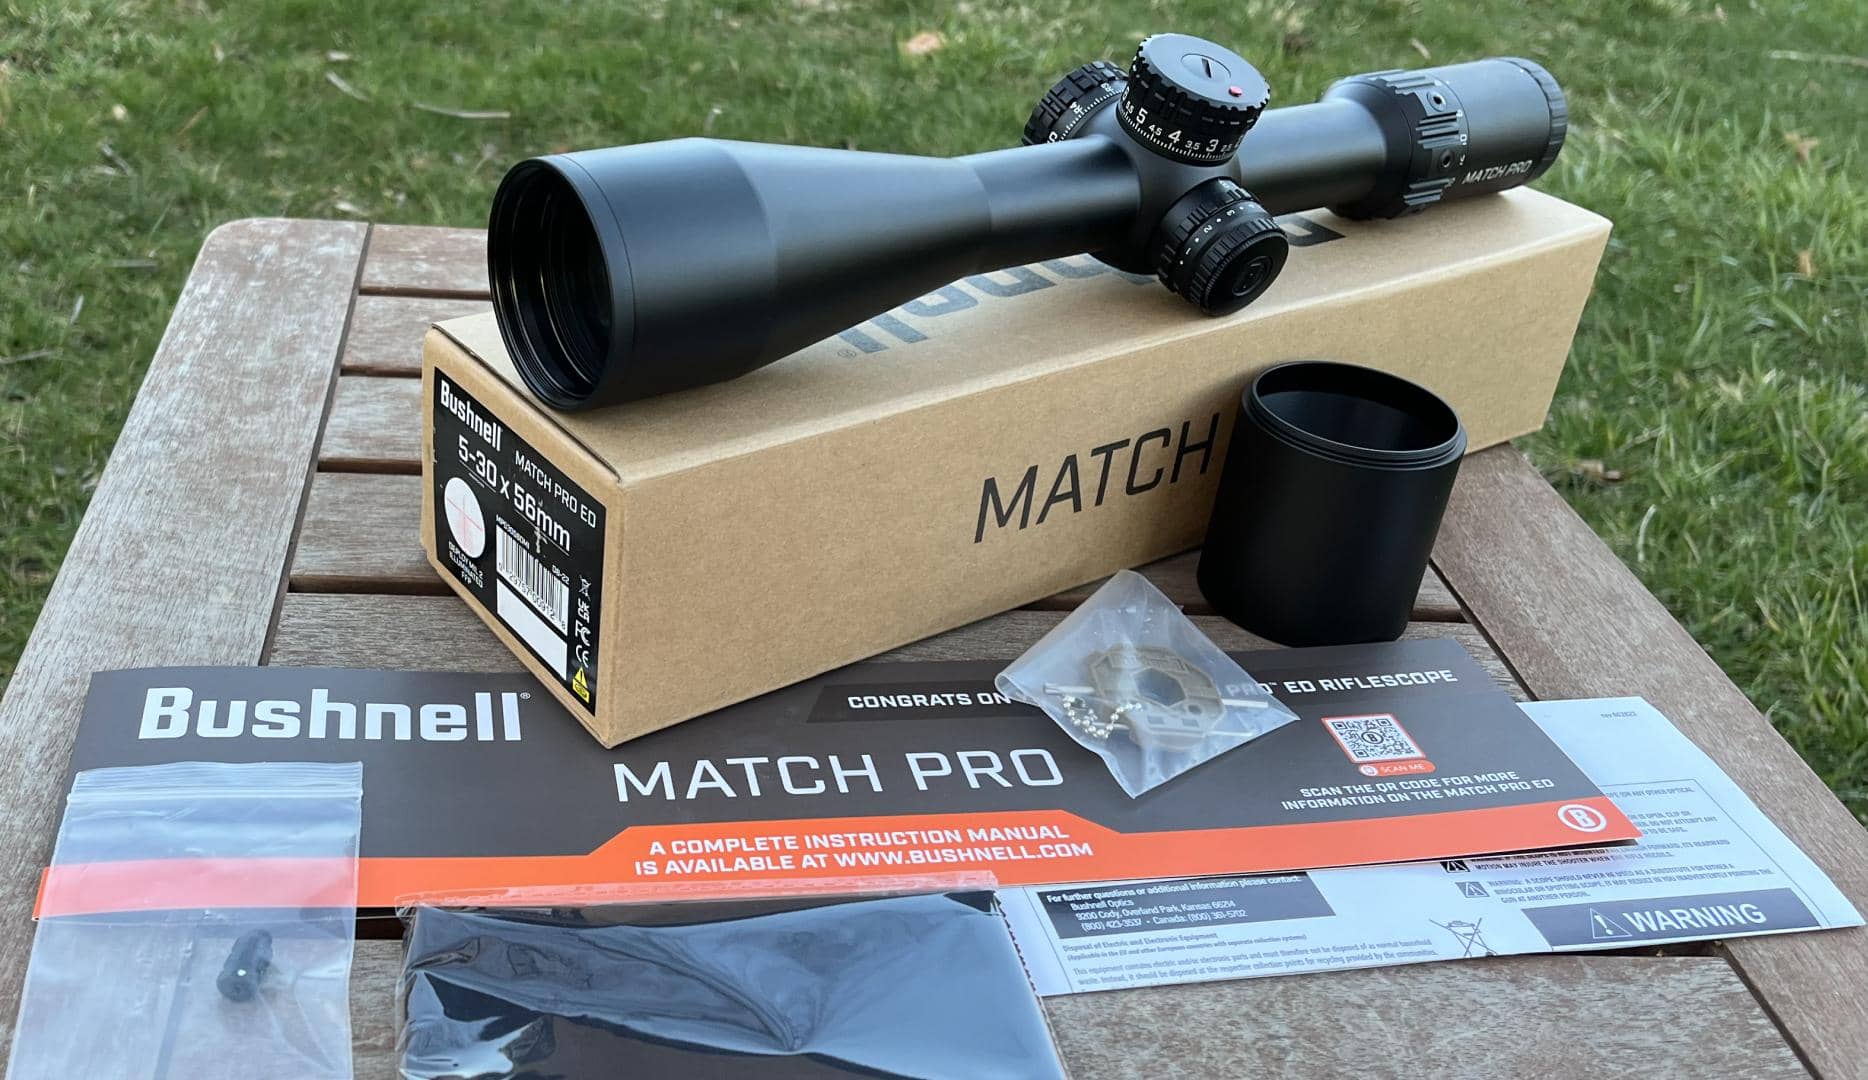 Bushnell Match Pro ED 5-30x56mm unboxing. Extras included with the scope are a short sunshade, lens cloth, keychain tool, and removable throw lever.